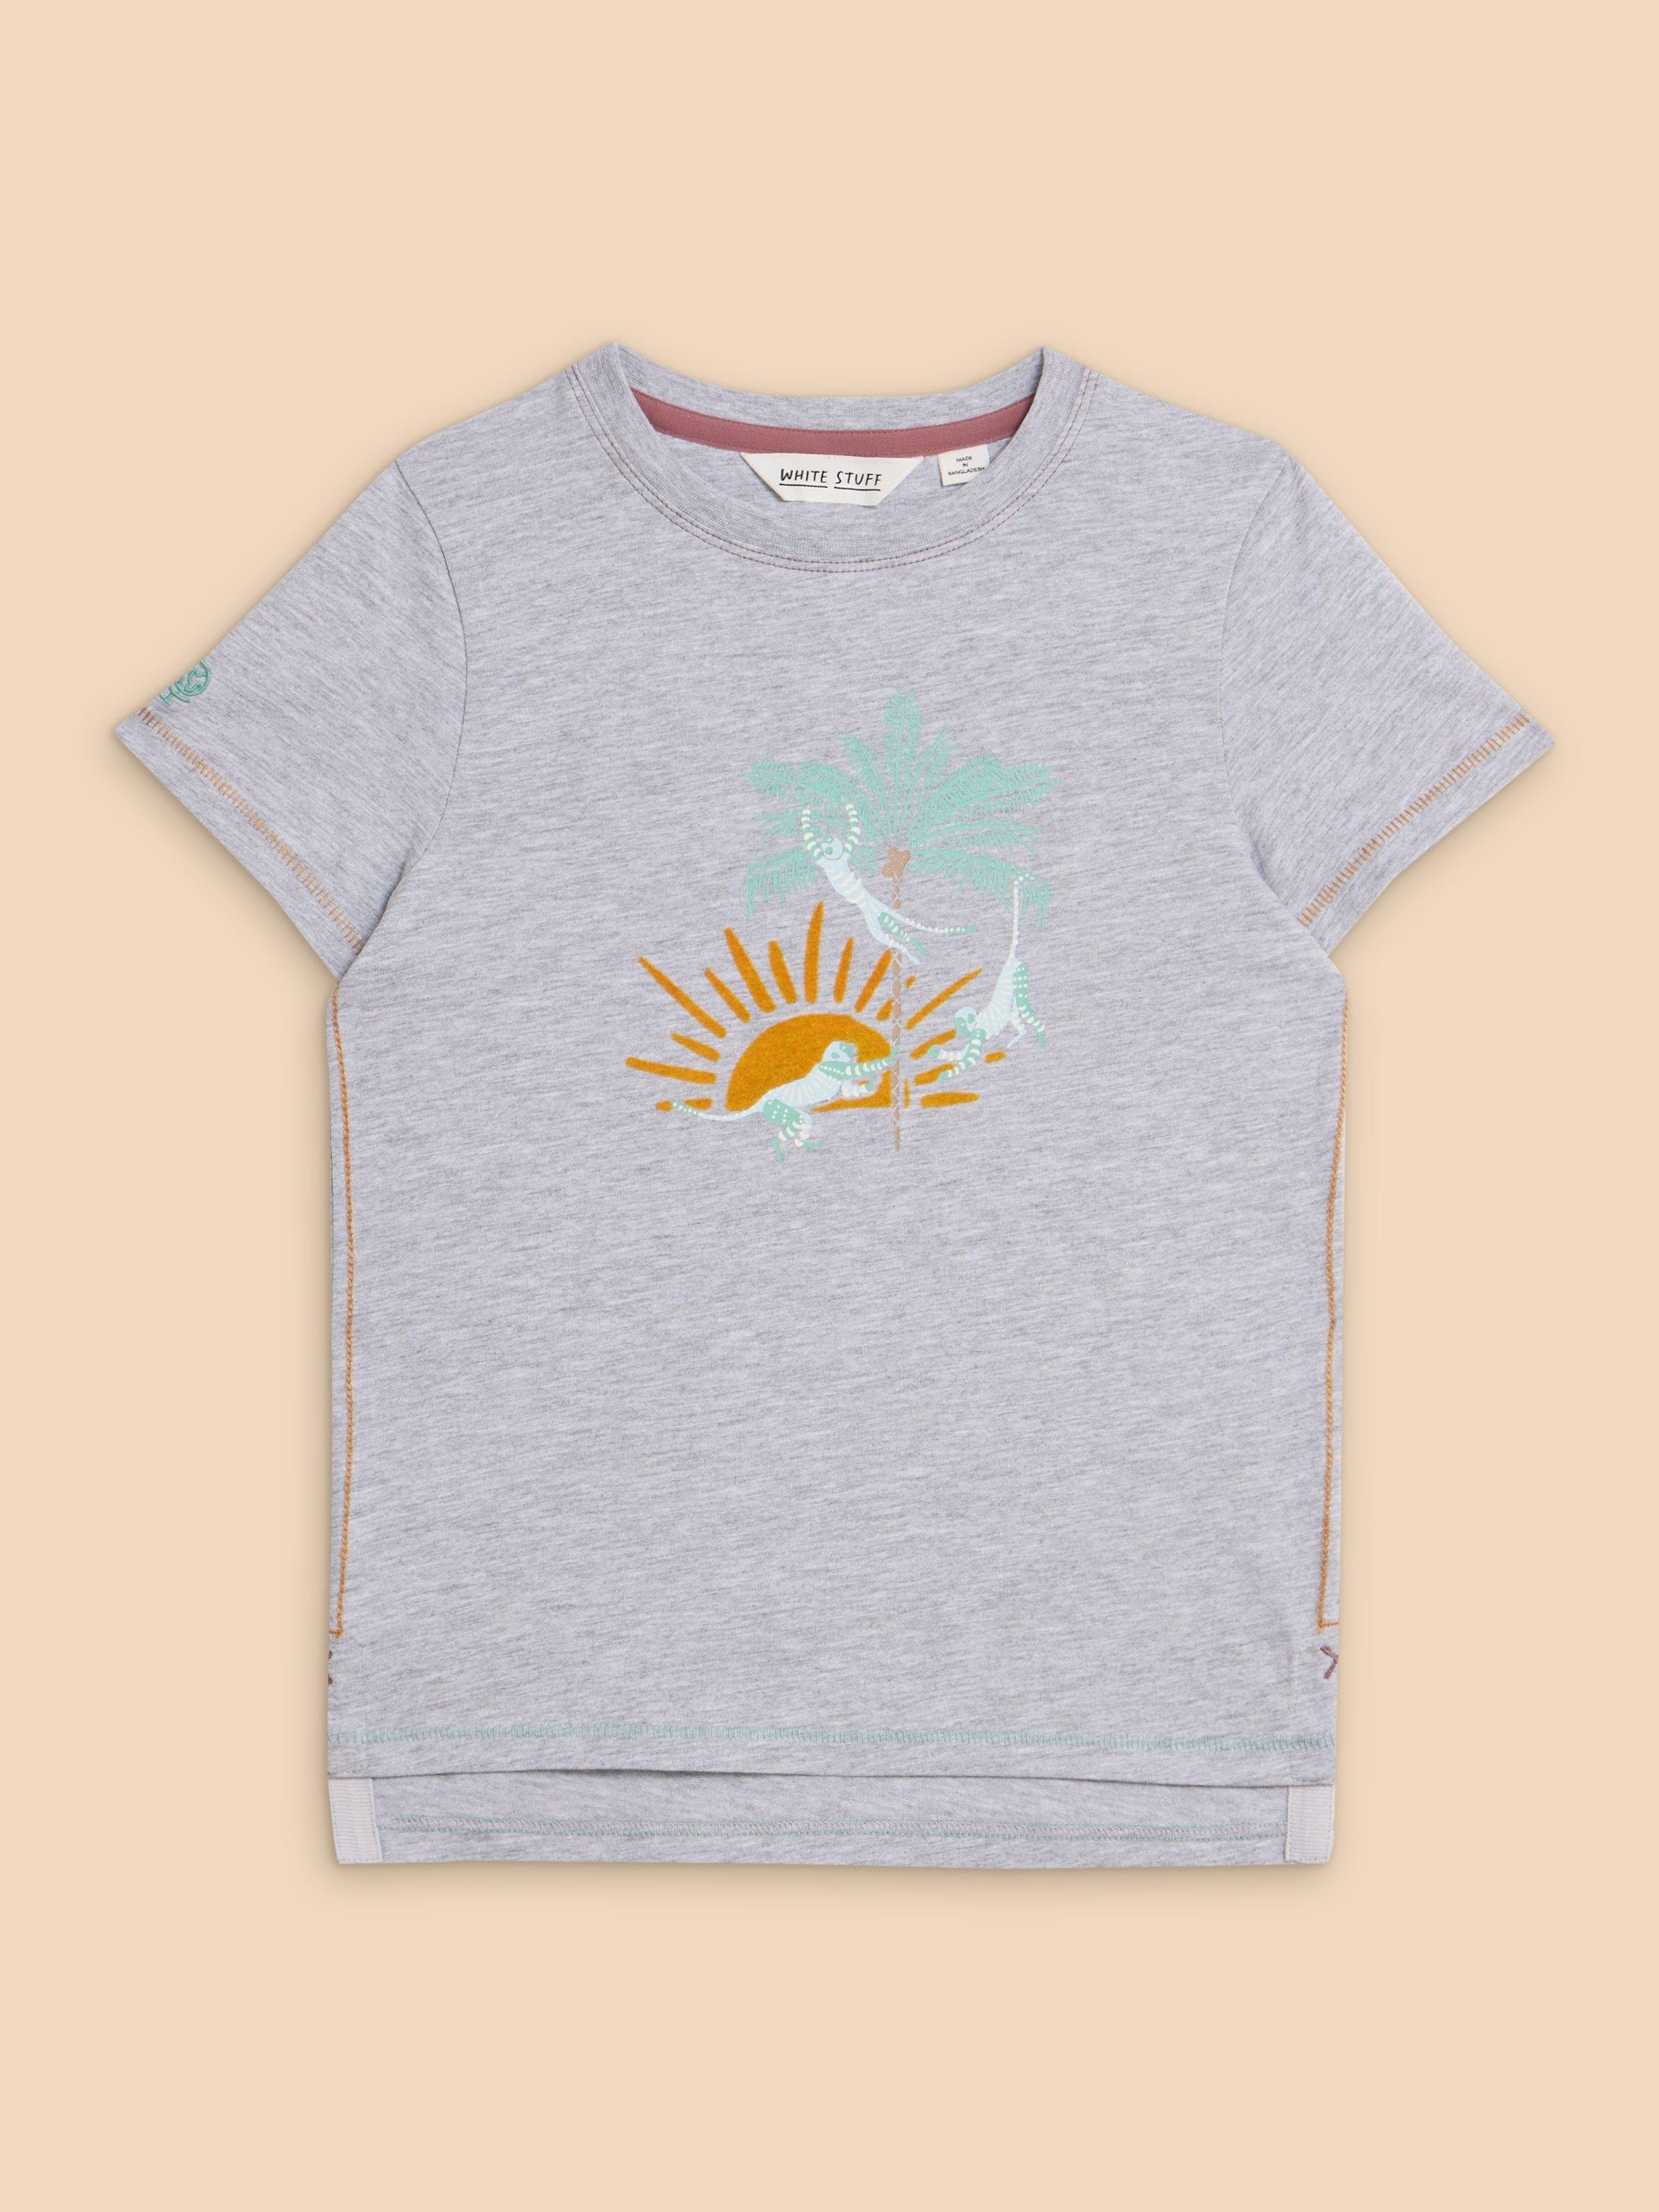 Cheeky Monkeys Graphic Tee in GREY MARL - FLAT FRONT